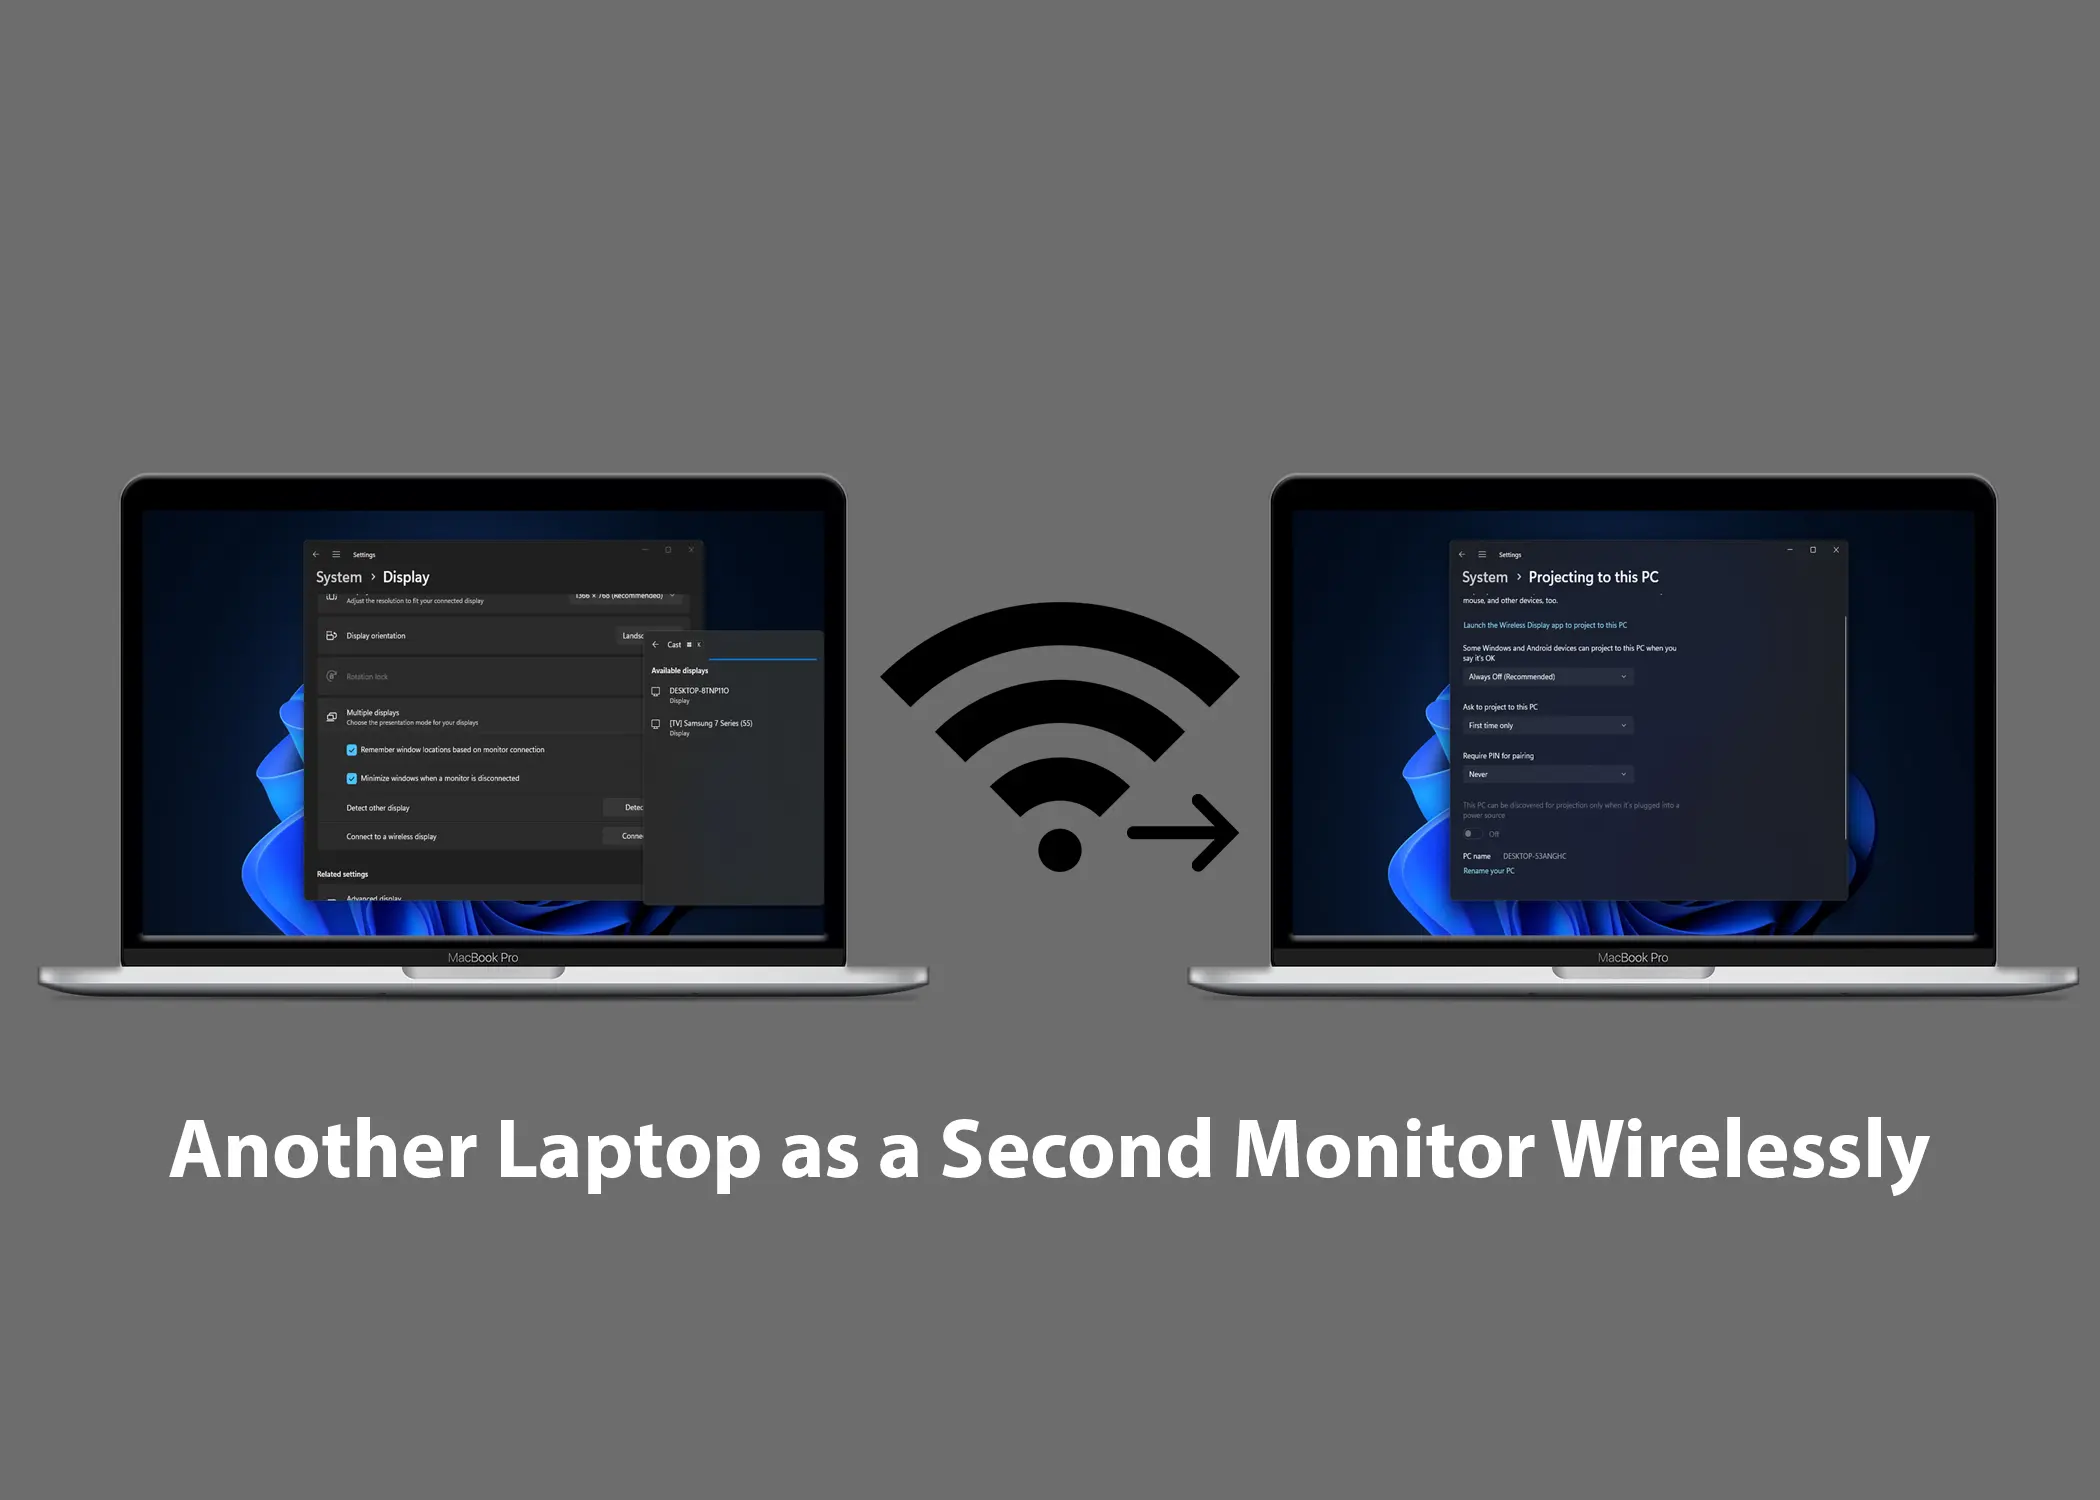 How to Use Another Laptop as a Second Monitor Wirelessly